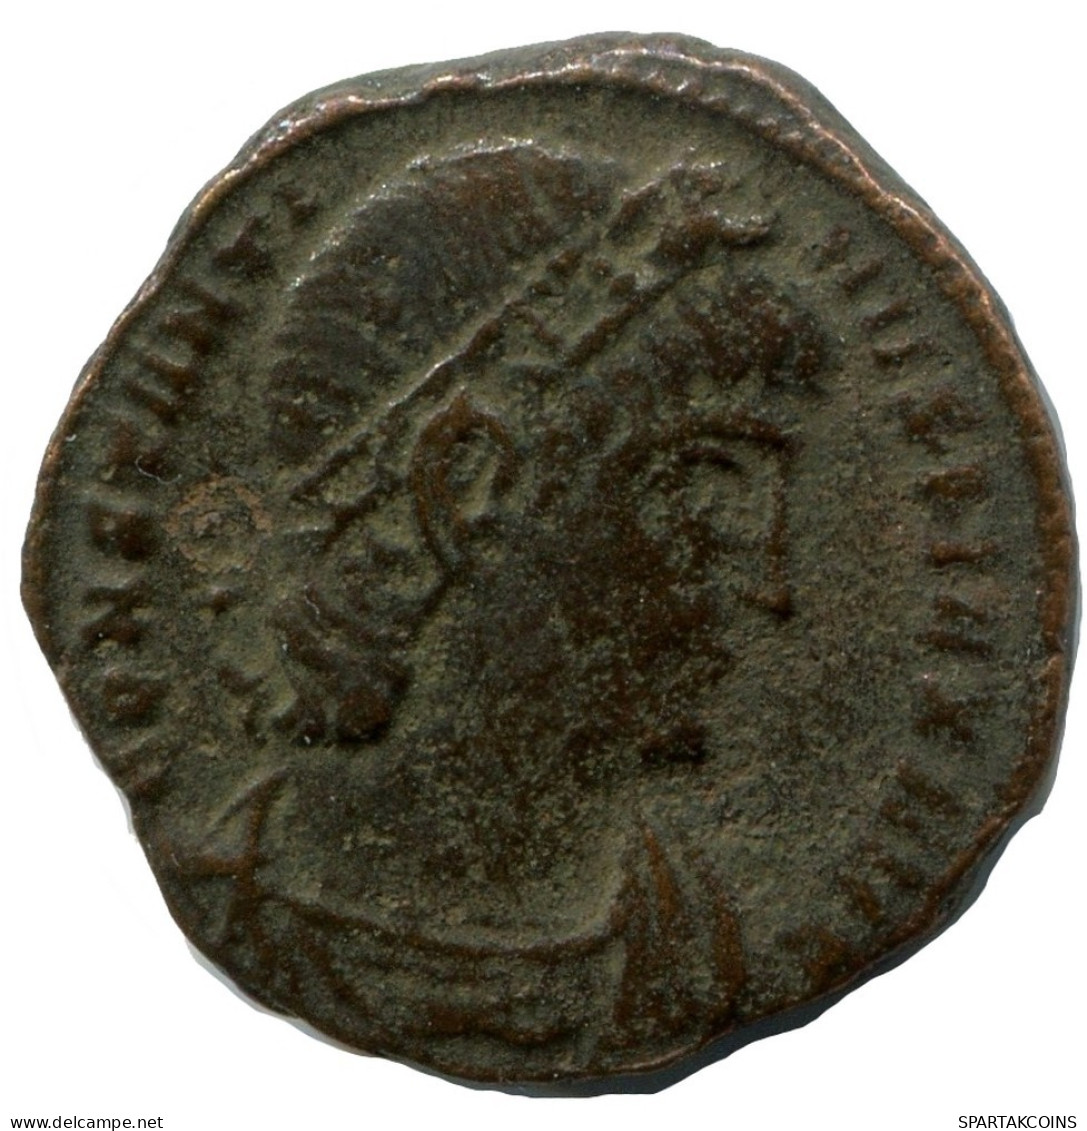 CONSTANTINE I MINTED IN CONSTANTINOPLE FOUND IN IHNASYAH HOARD #ANC10738.14.F.A - The Christian Empire (307 AD To 363 AD)